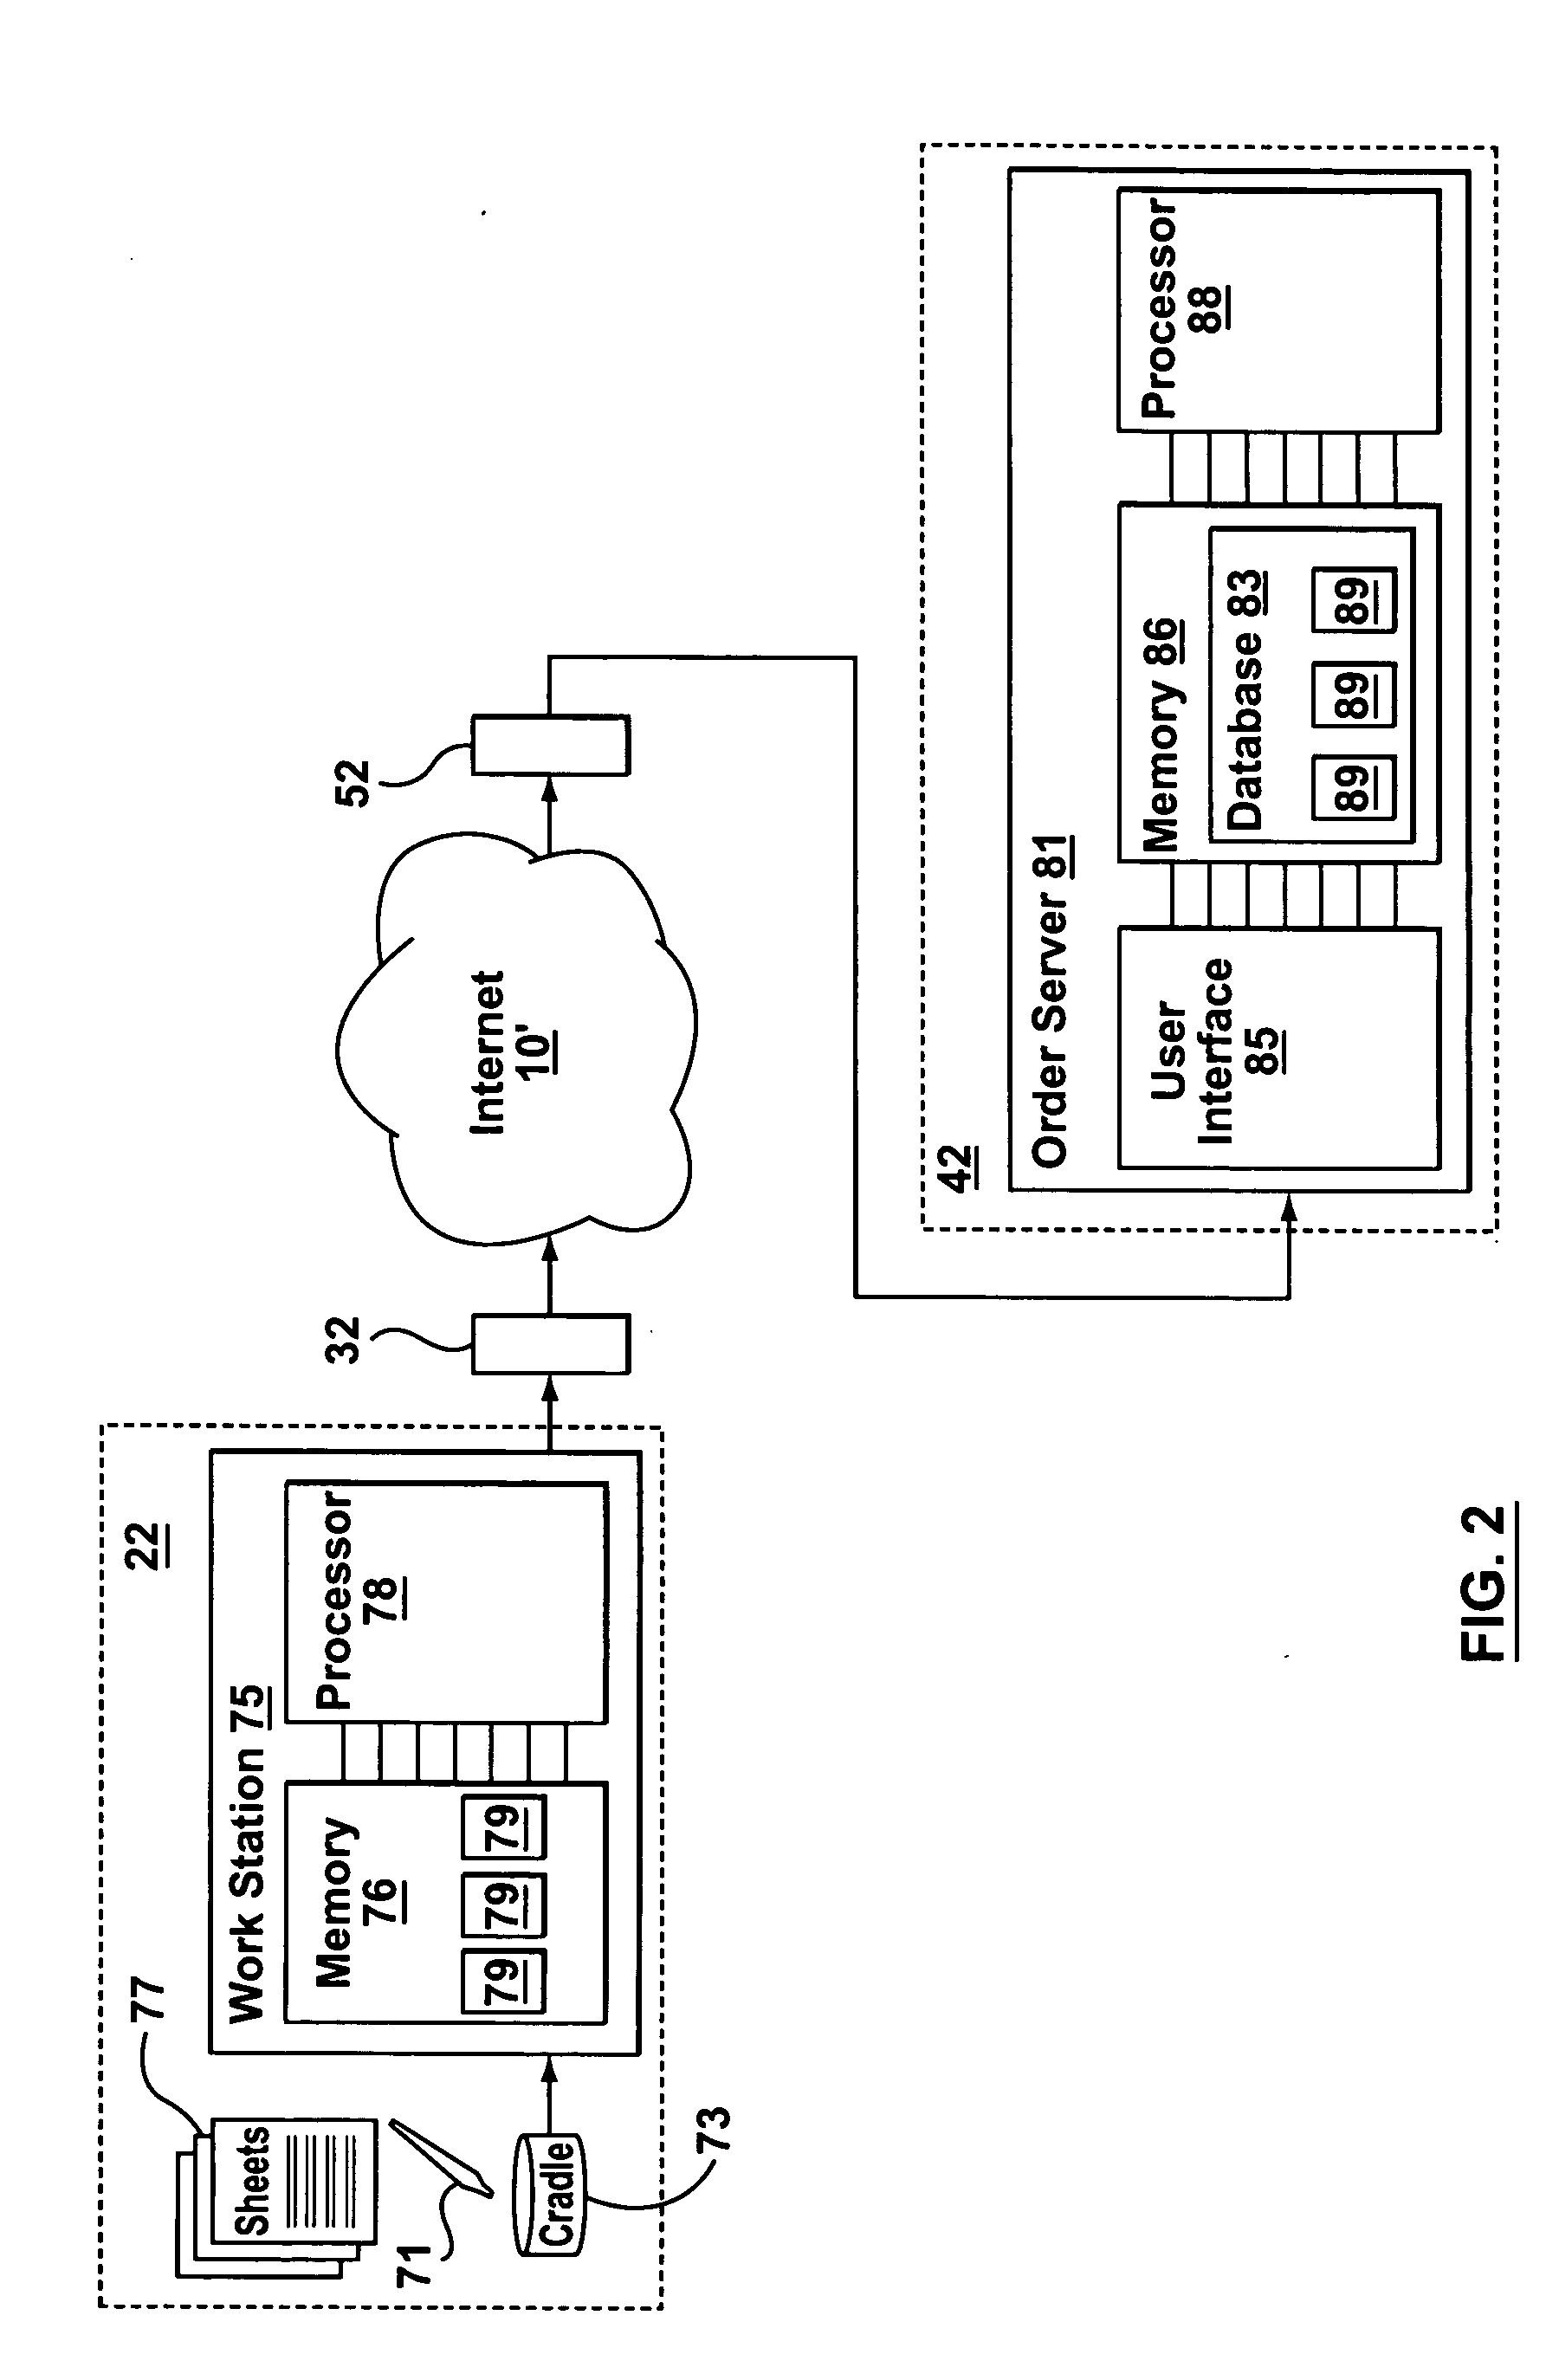 Electronic system and method for processing drug prescriptions